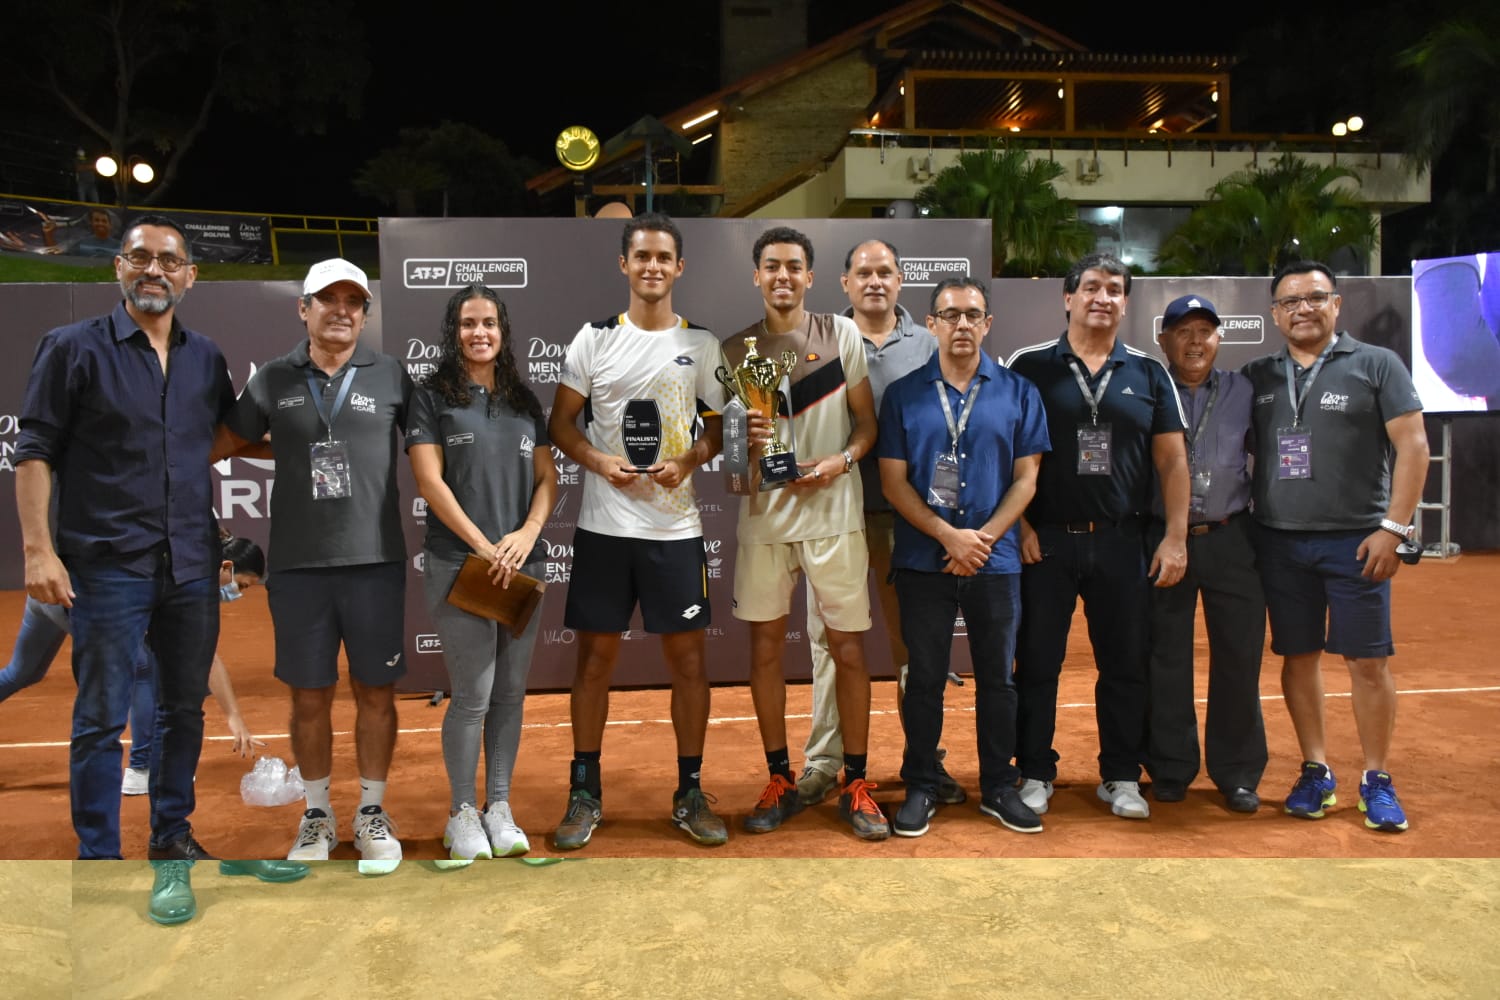 Jubb claims first Challenger title while Jones, Little and Maloney lift ITF doubles trophies